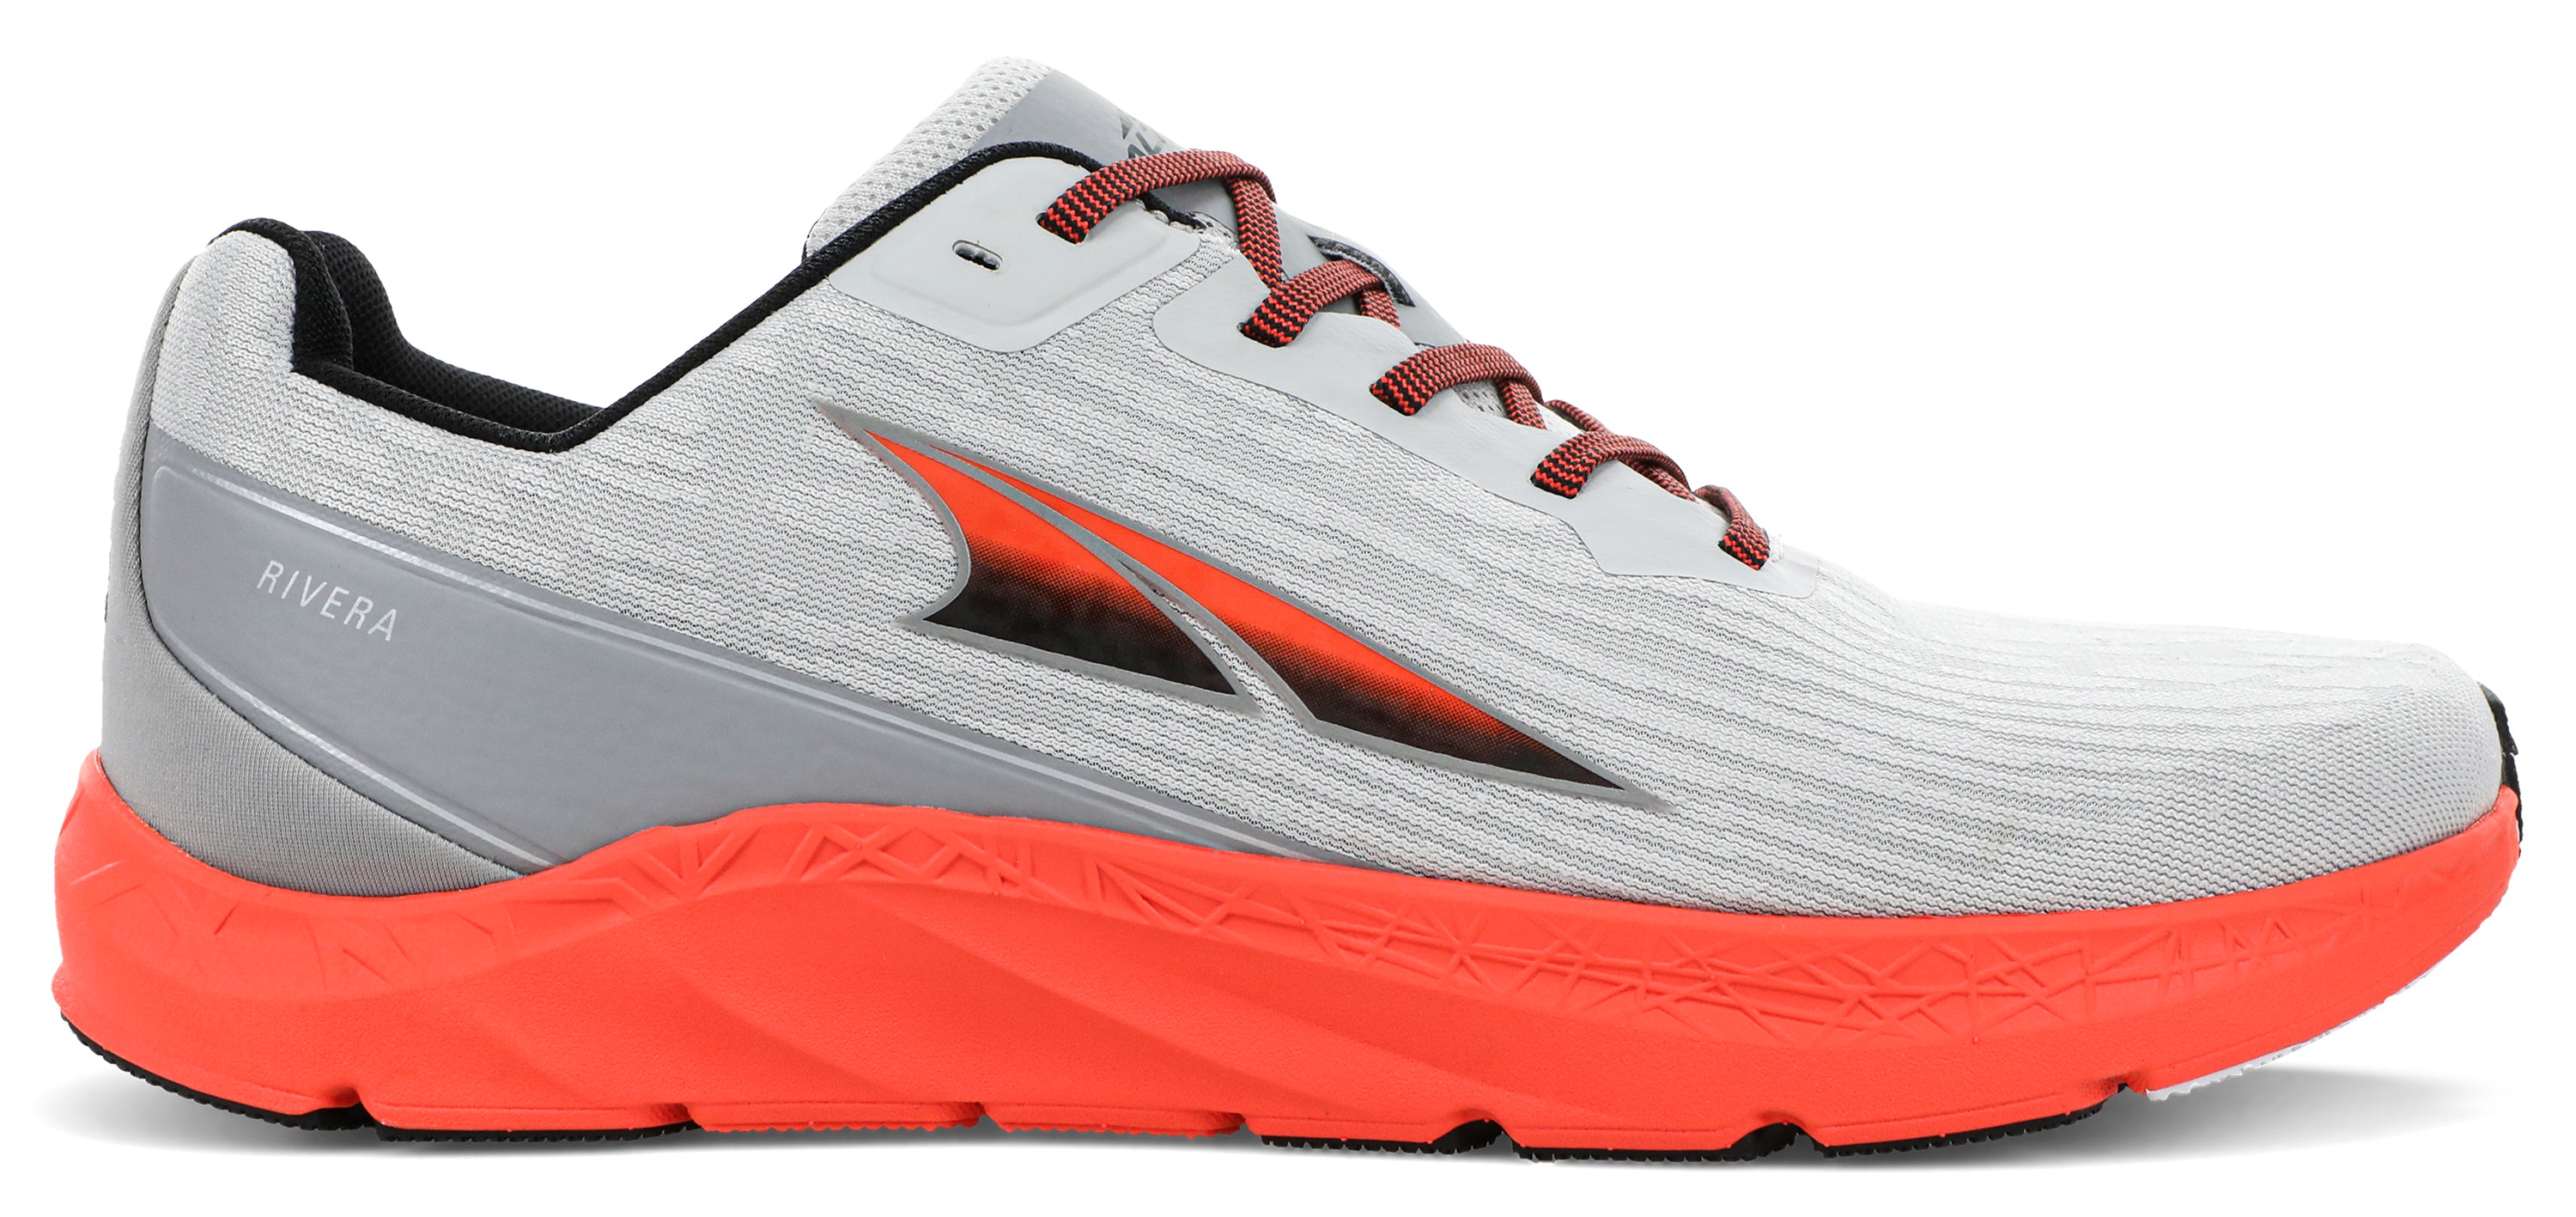 Altra Men's Rivera Road Running Shoe in Gray/Orange from the side